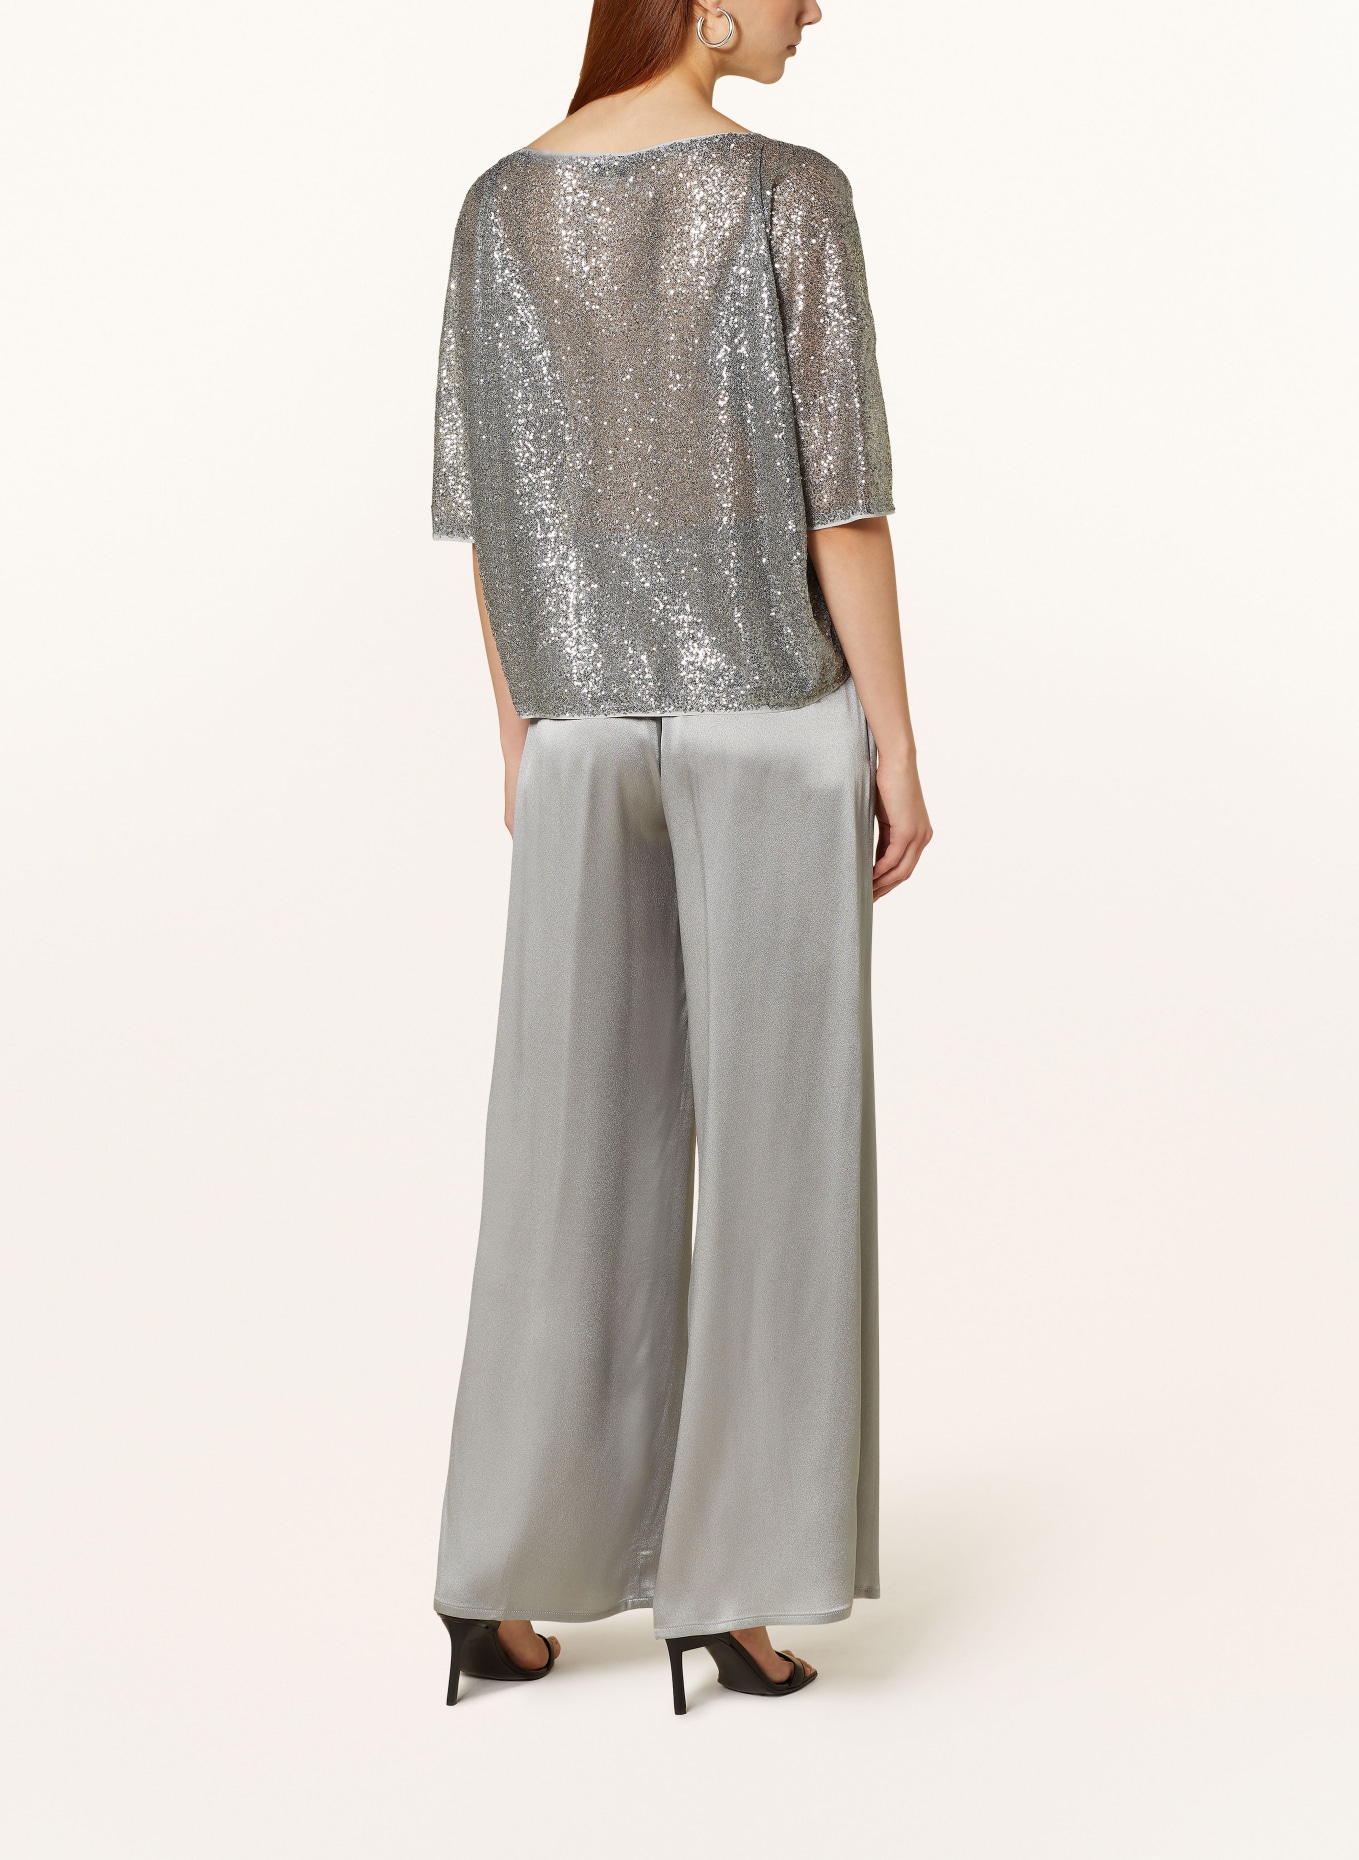 ANTONELLI firenze Shirt blouse DUNCAN with 3/4 sleeves and sequins, Color: SILVER (Image 3)